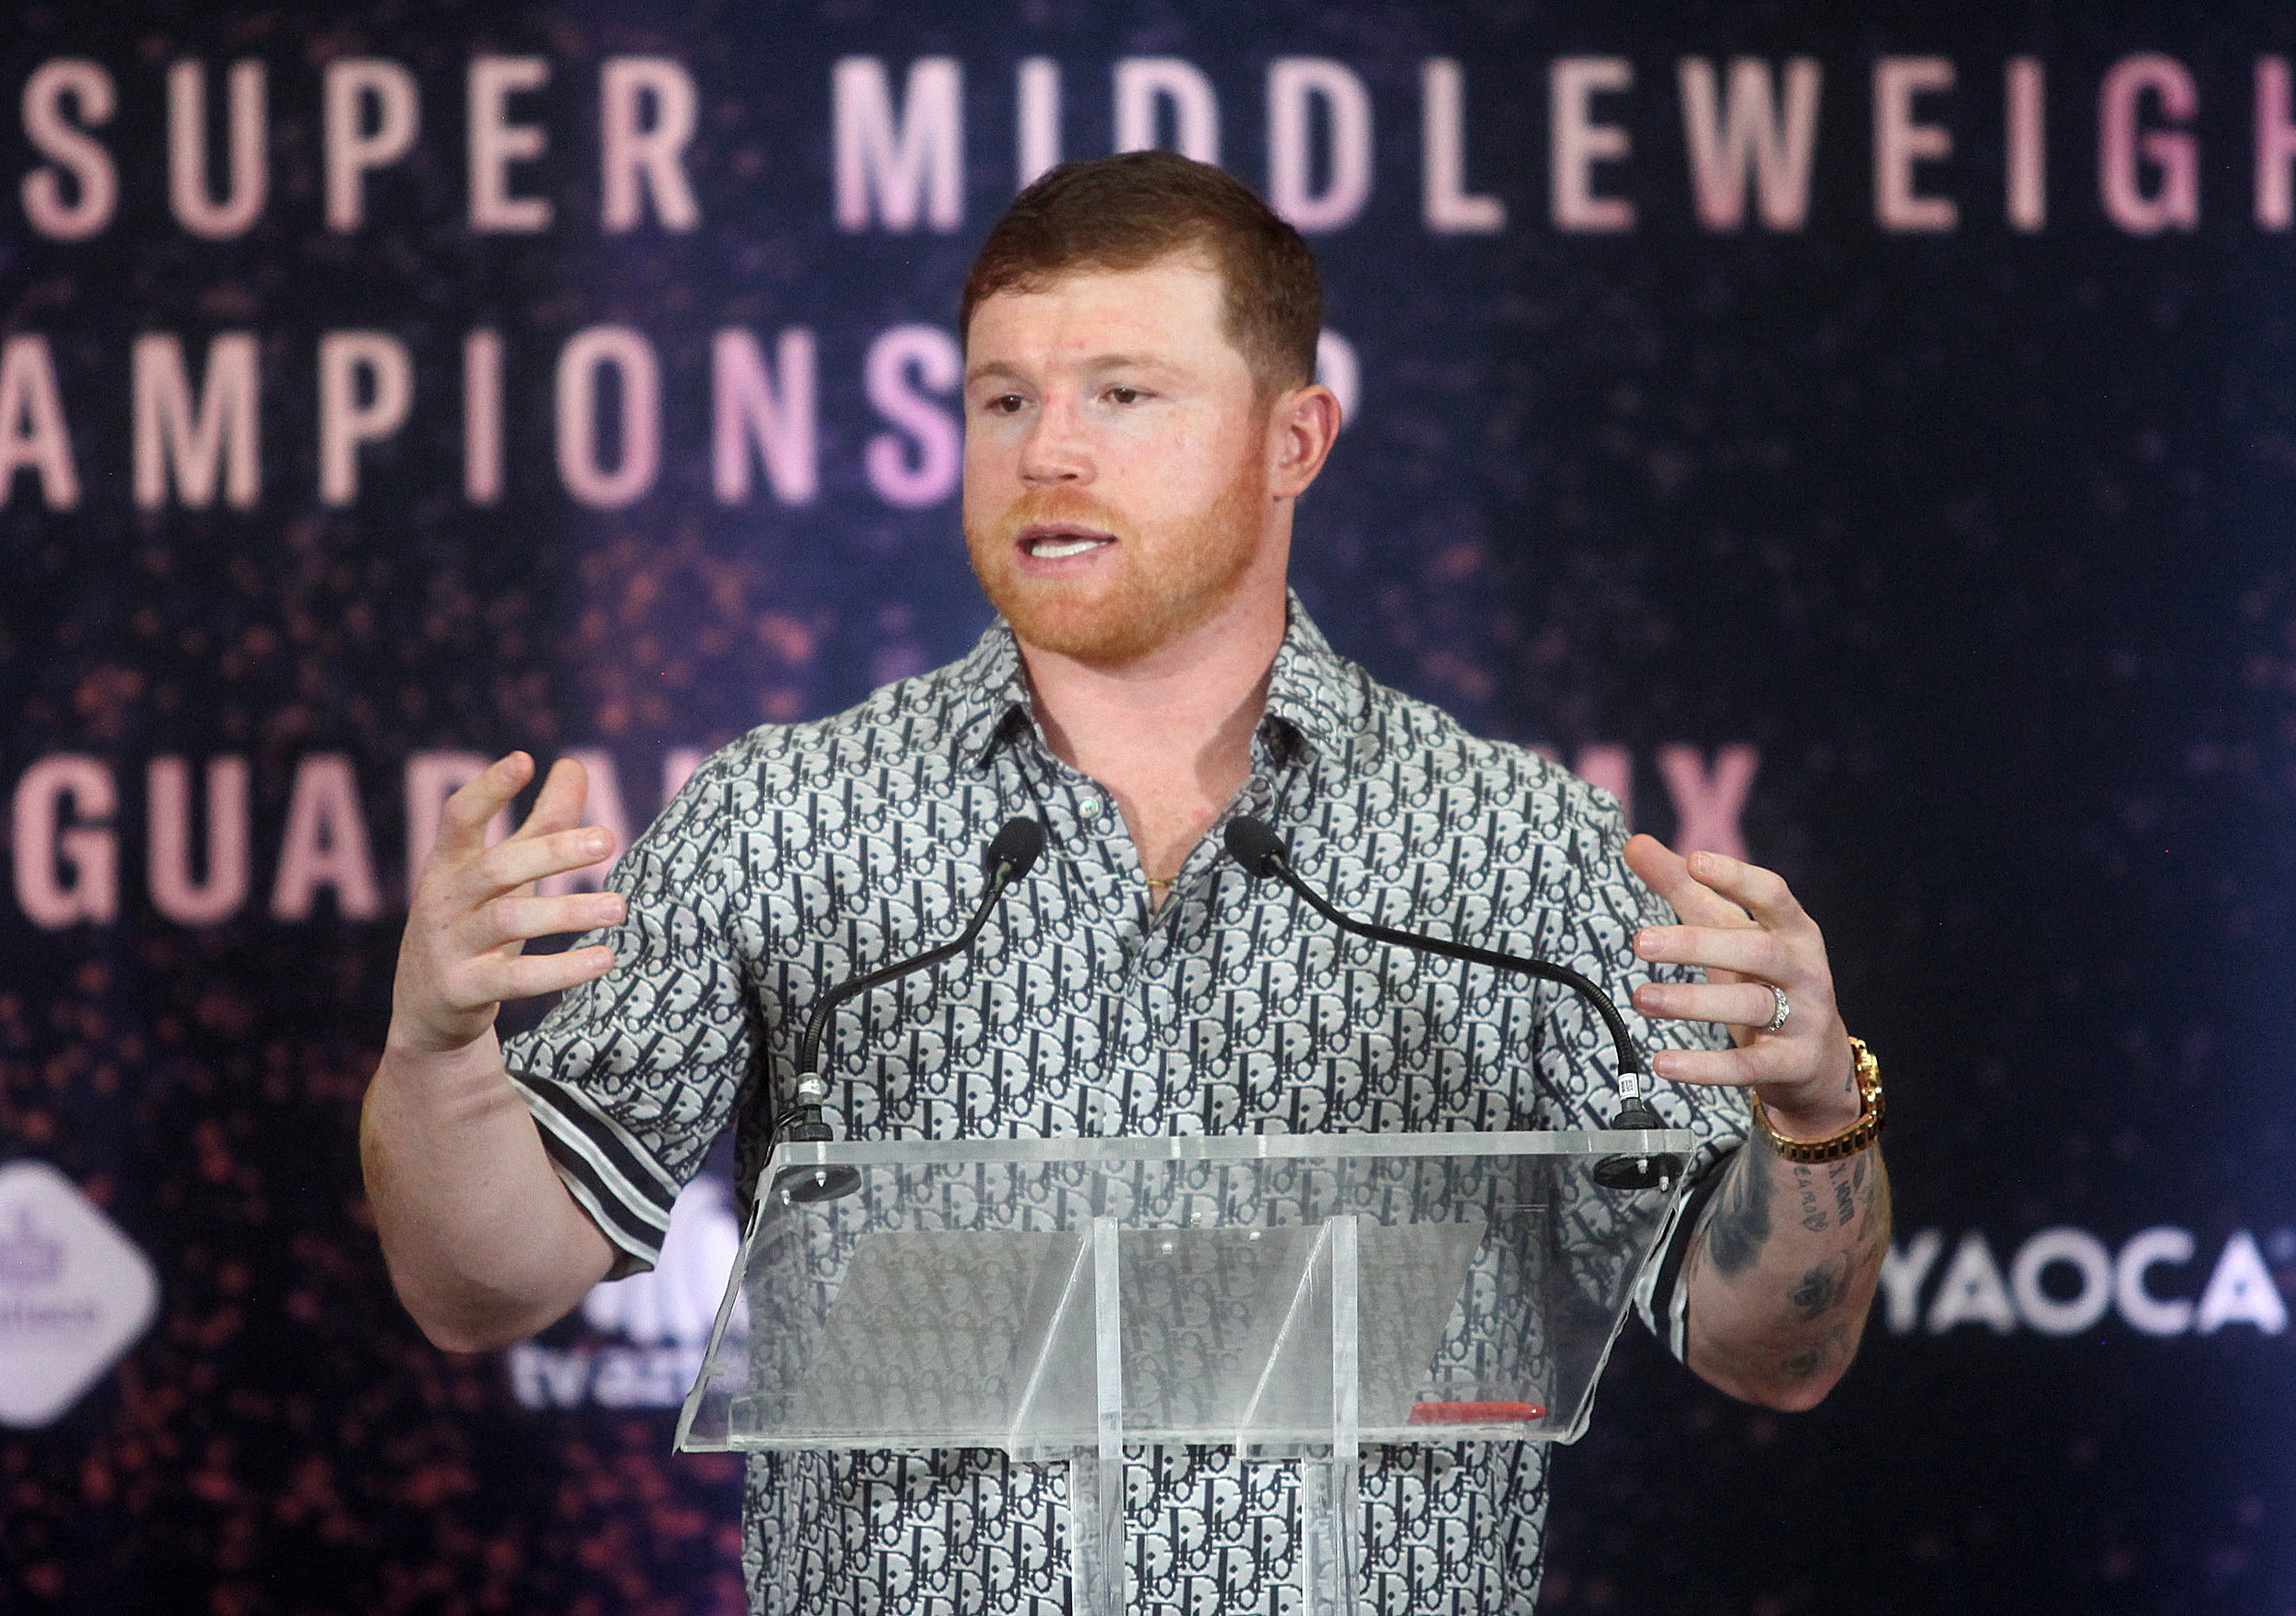 Canelo Takes Aim At Marquez Following Ryder Comments